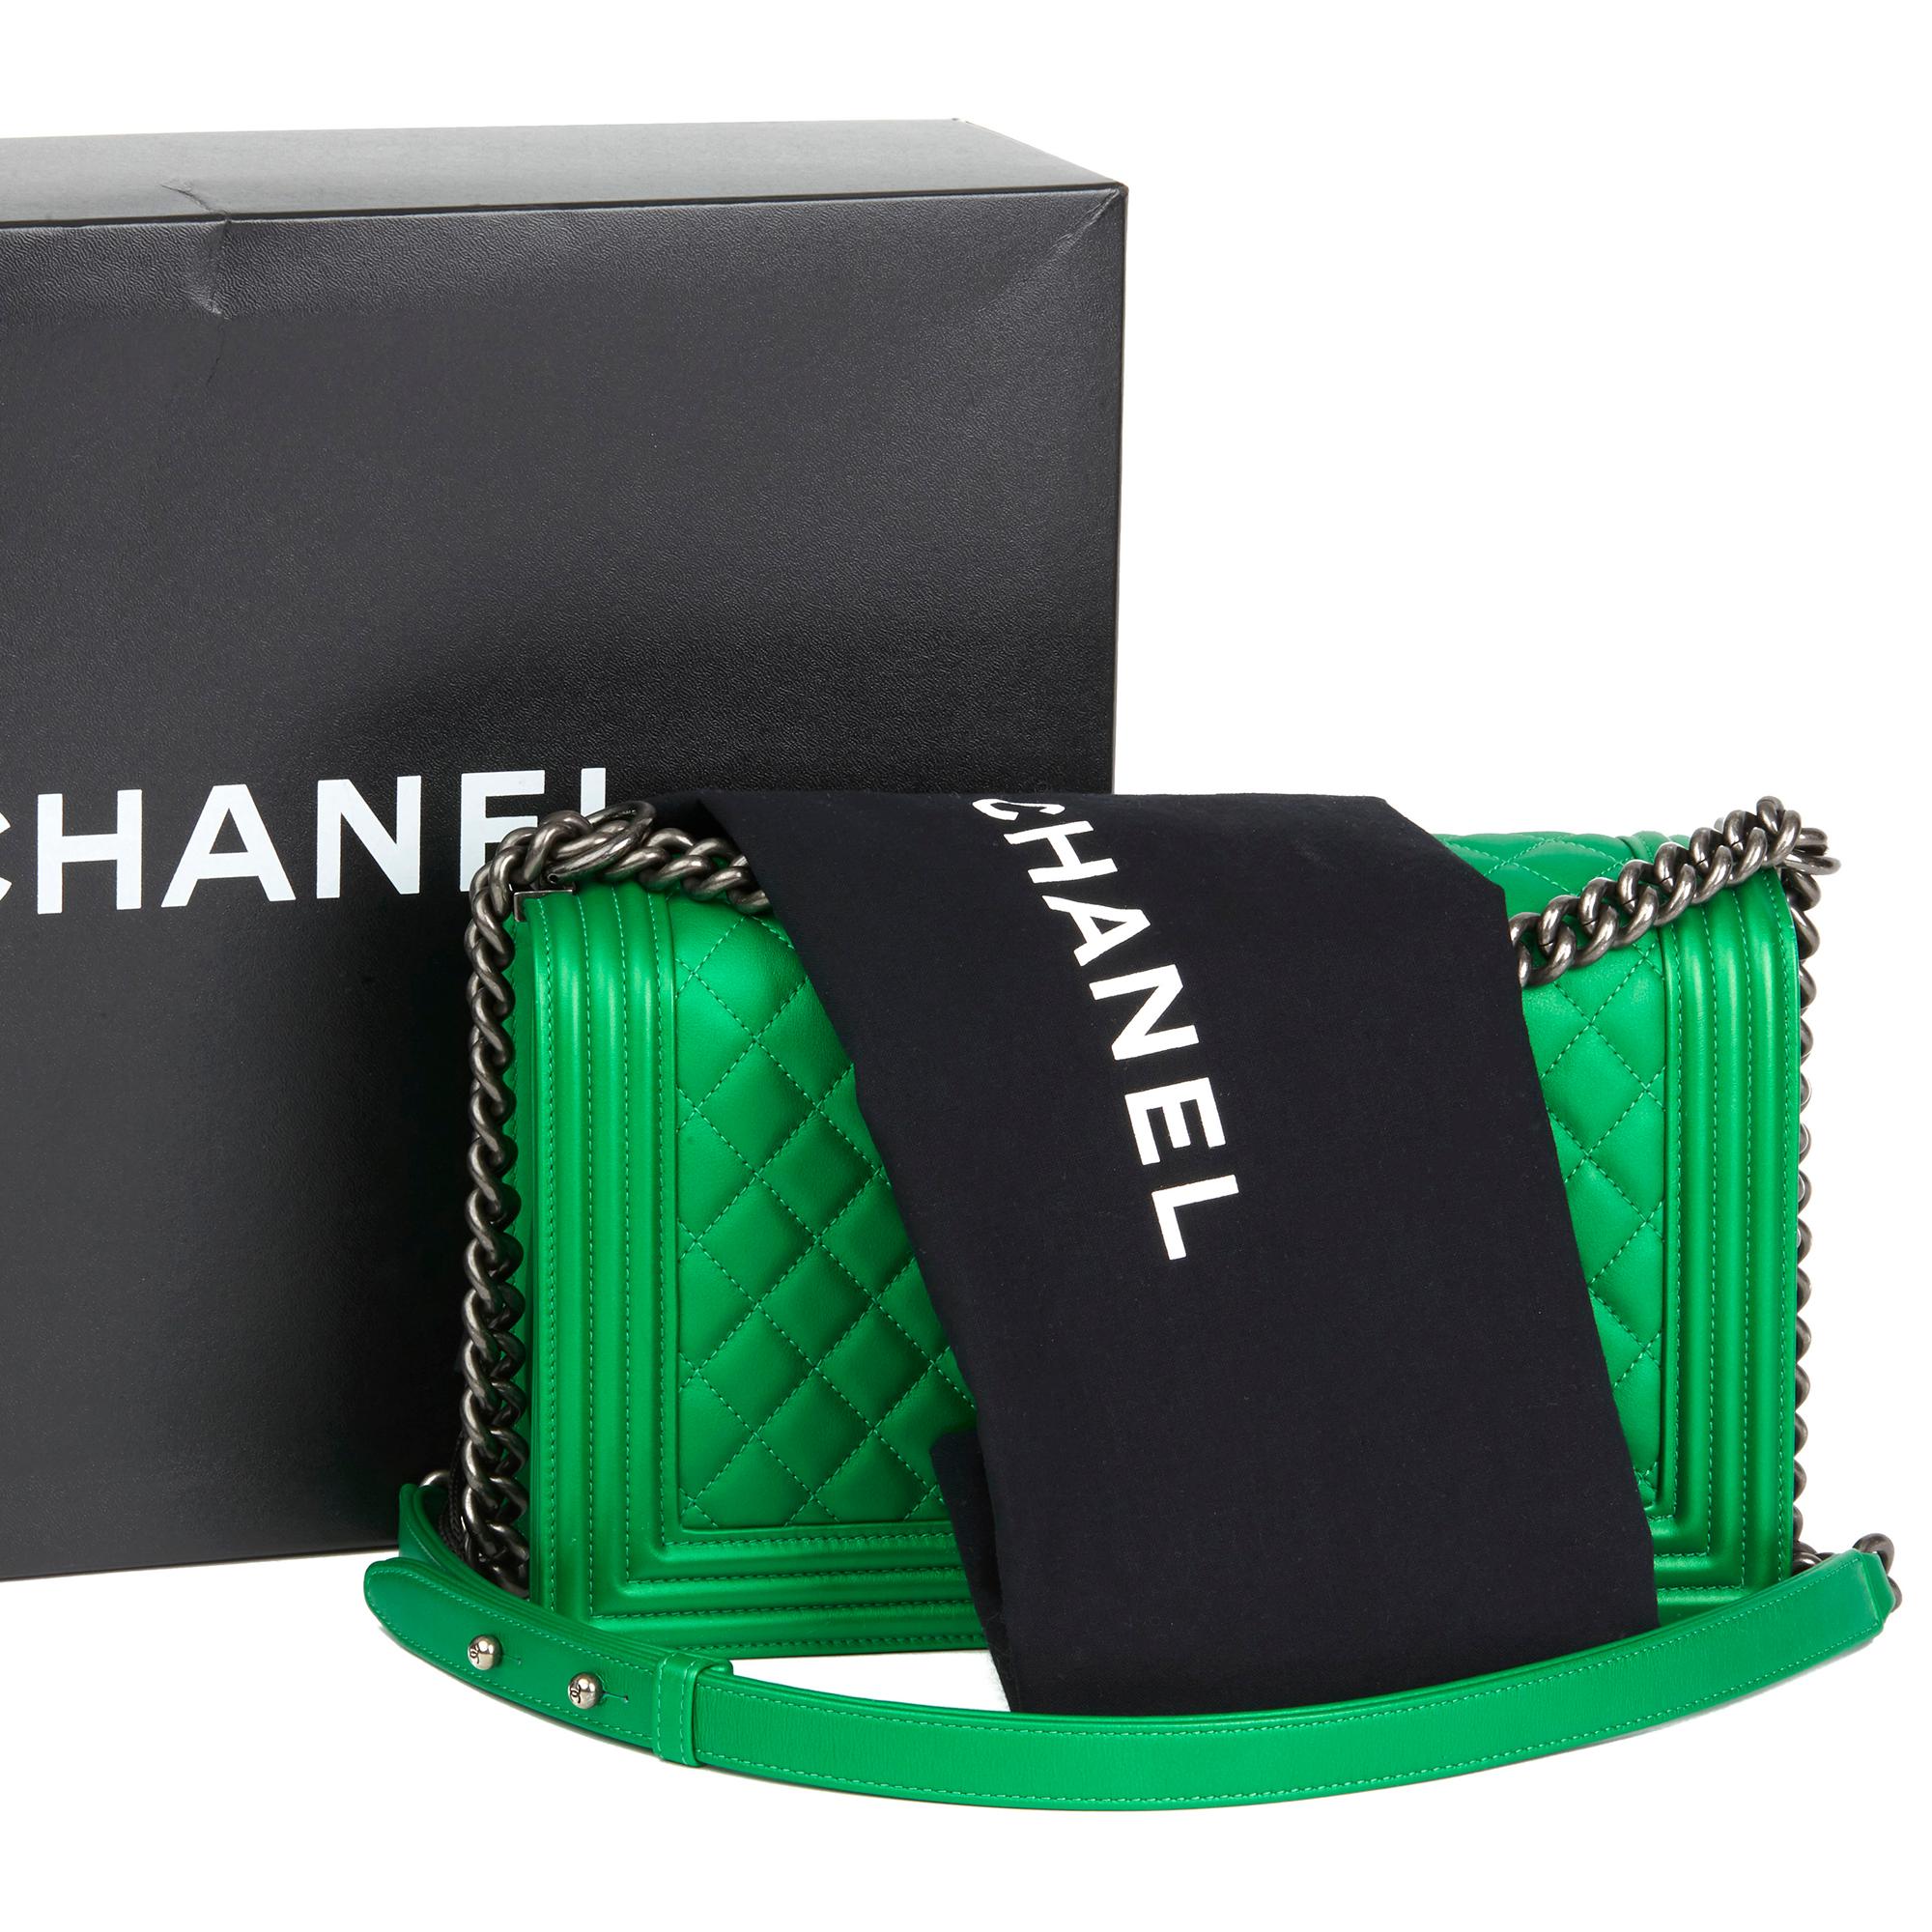 2015 Chanel Green Quilted Metallic Lambskin Leather New Medium Le Boy 7